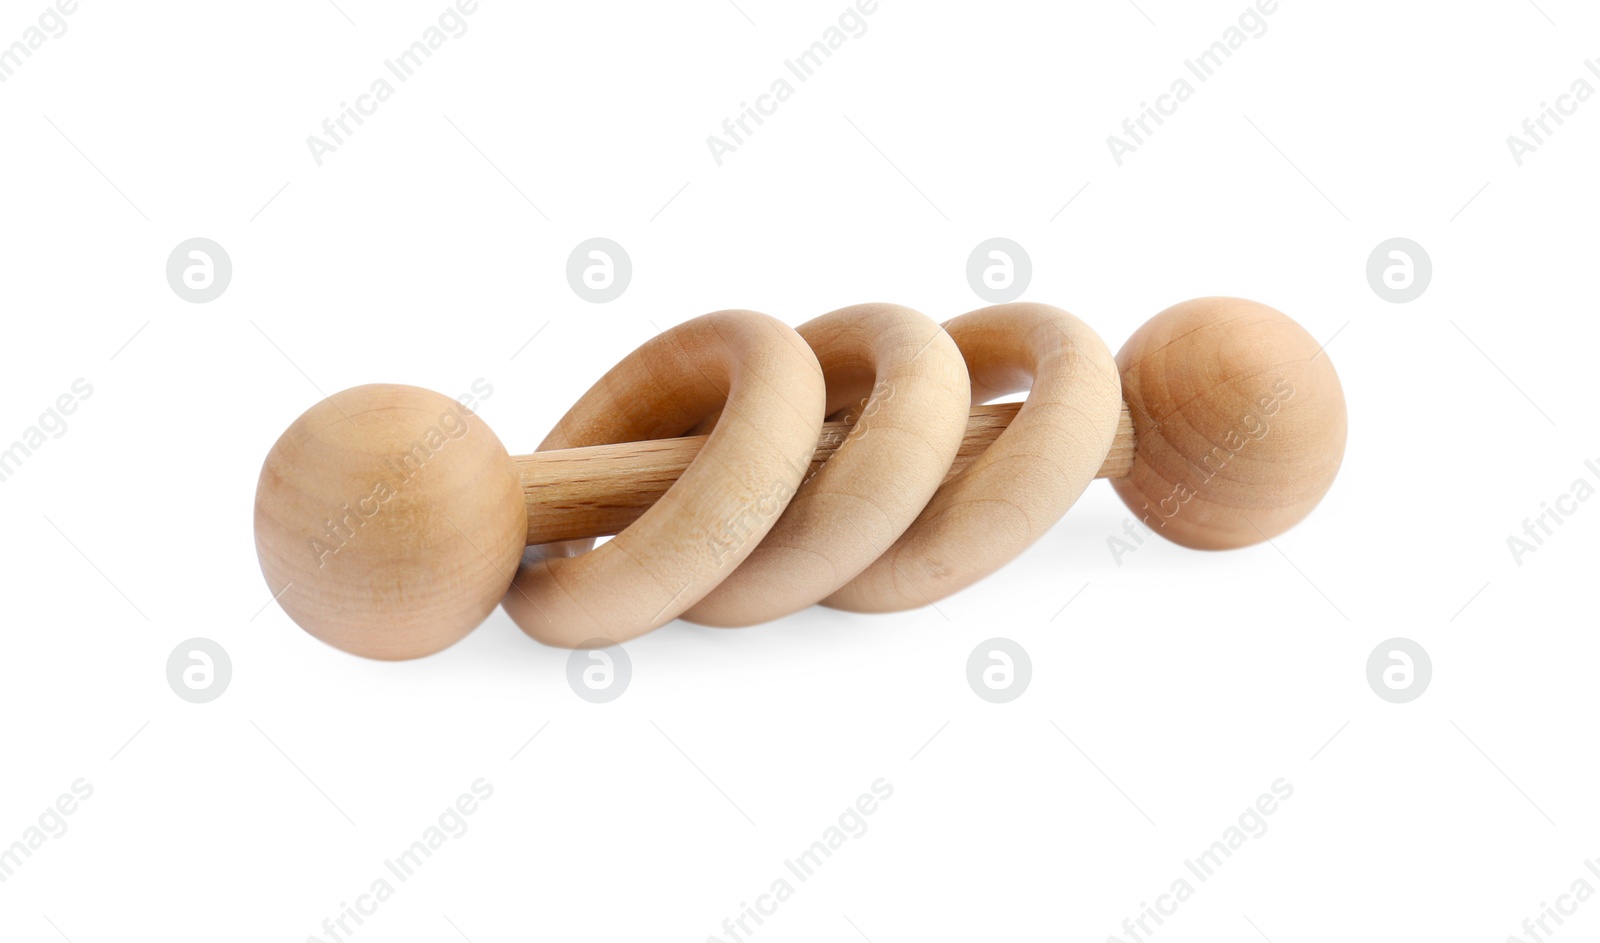 Photo of Wooden rattle isolated on white. Children's toy